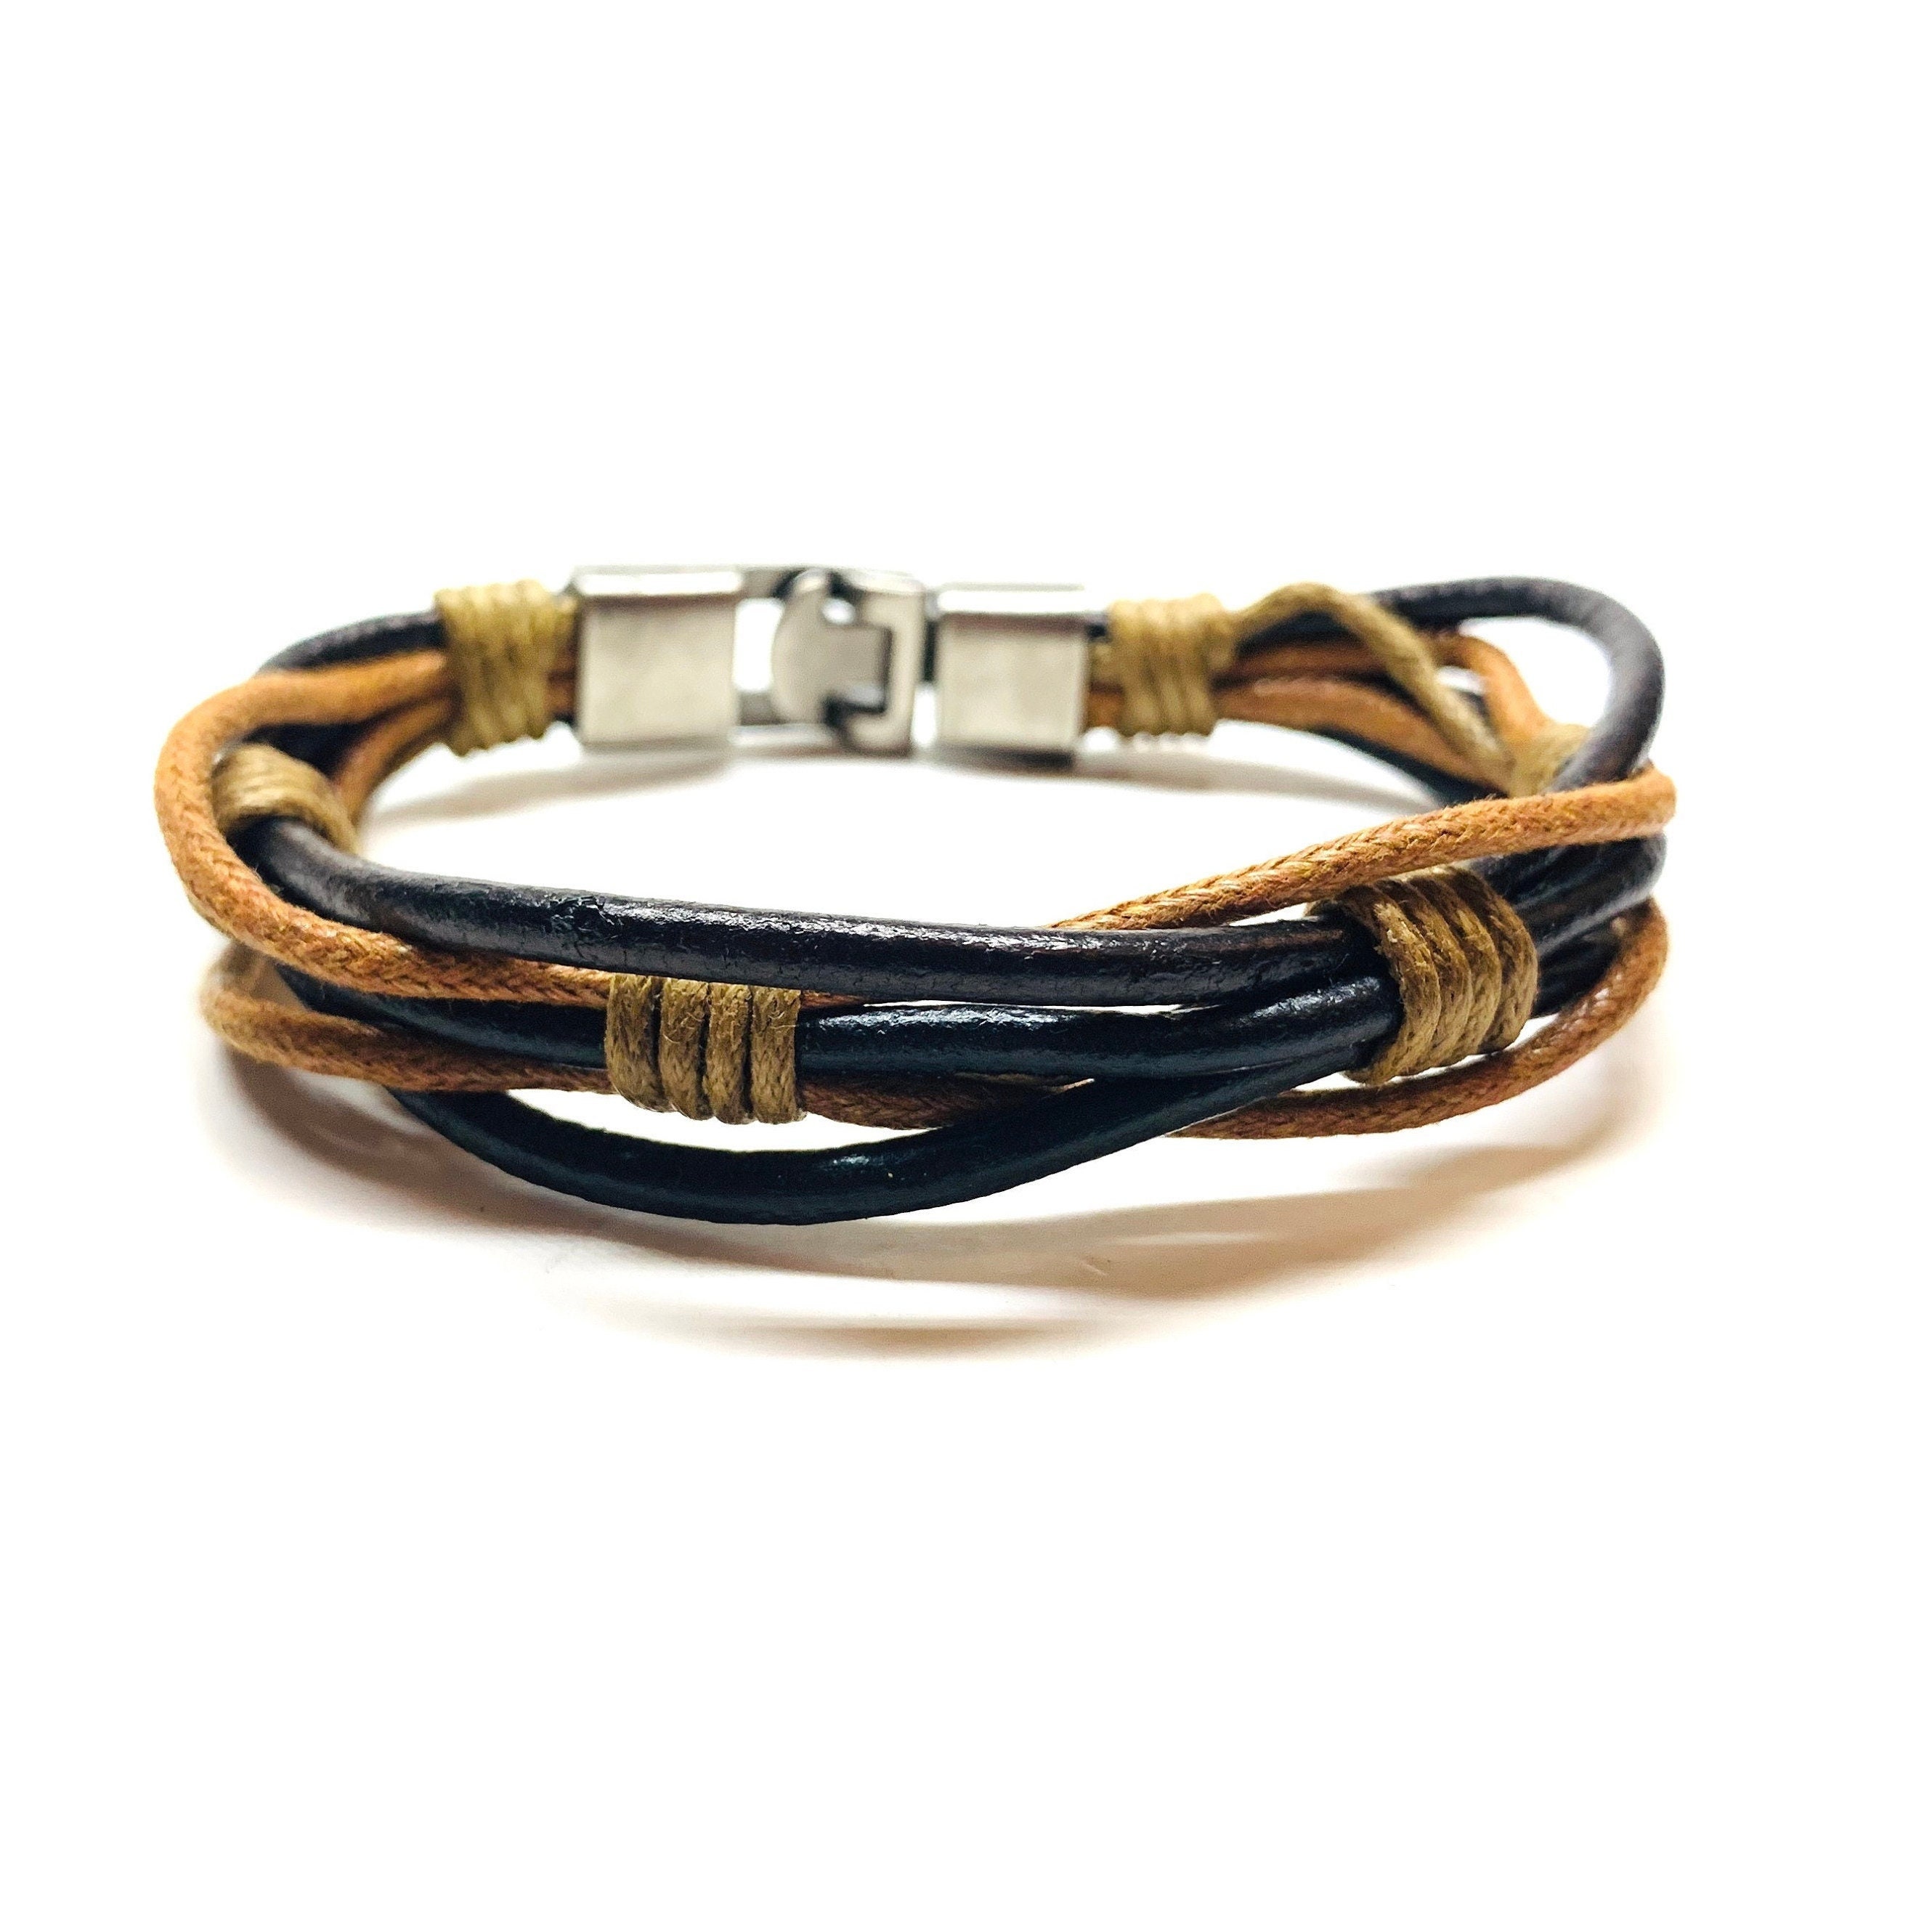 Leather Multilayer Bracelet with Music Snap Buttons | Music Jewellery Online